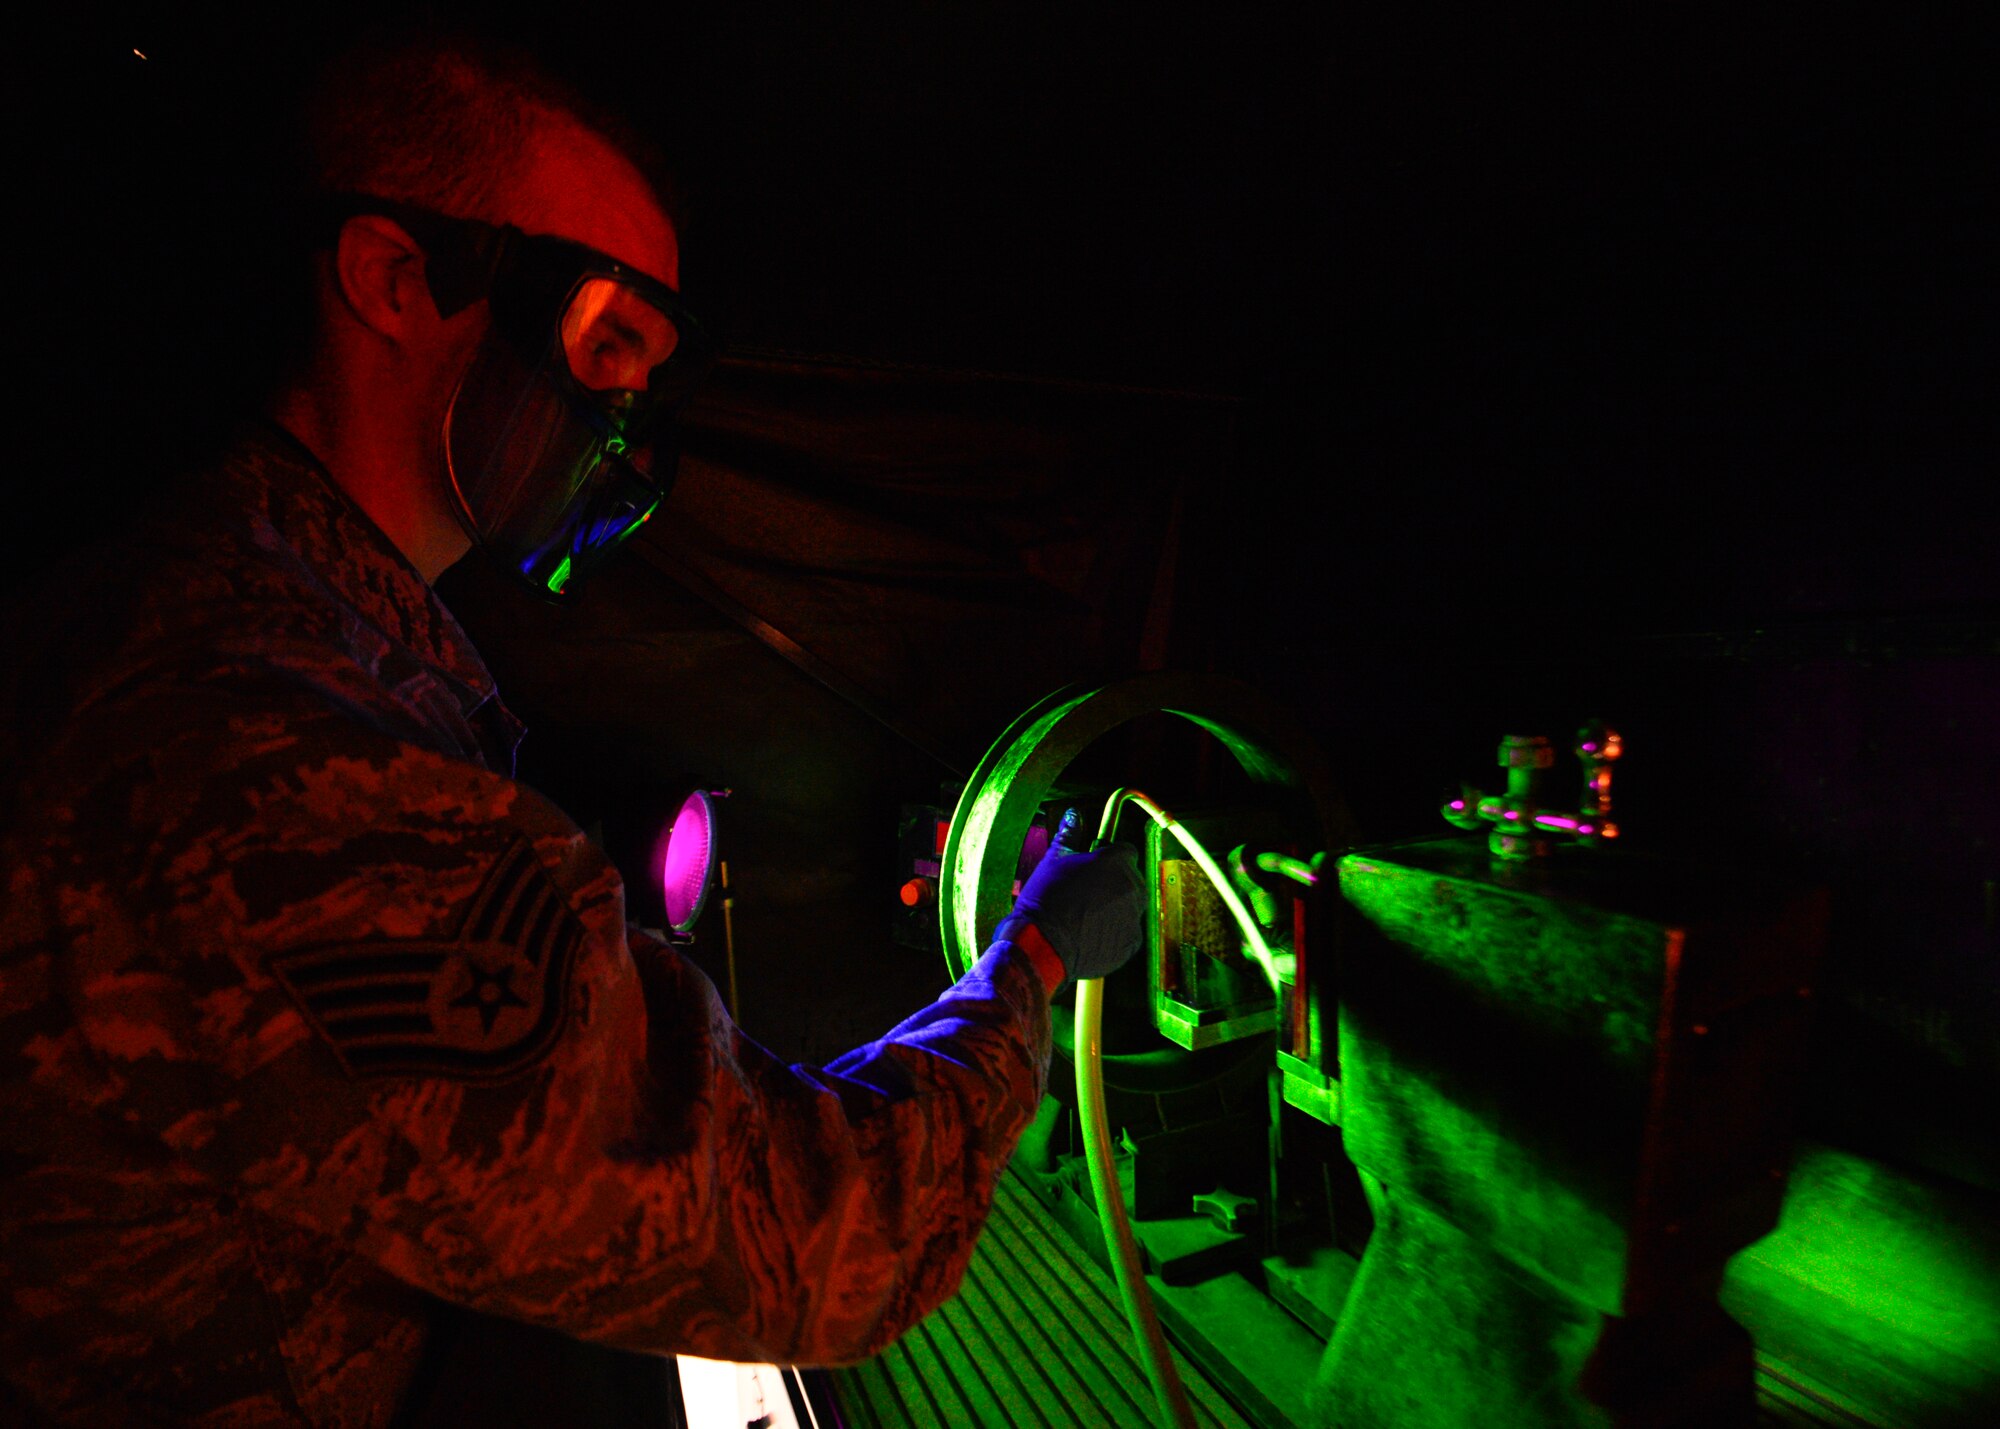 Staff Sgt. Chad Ericksen, 436th Maintenance Squadron Non-destructive Inspection craftsman, conducts particle testing on a crane hook March 13, 2015, at Dover Air Force Base, Del. Ericksen reports the findings of his test into the Parts, Inspection, Turnover (PIT) log that he created in 2012 as a way to better record maintenance records within NDI. (U.S. Air Force photo/Airman 1st Class William Johnson)